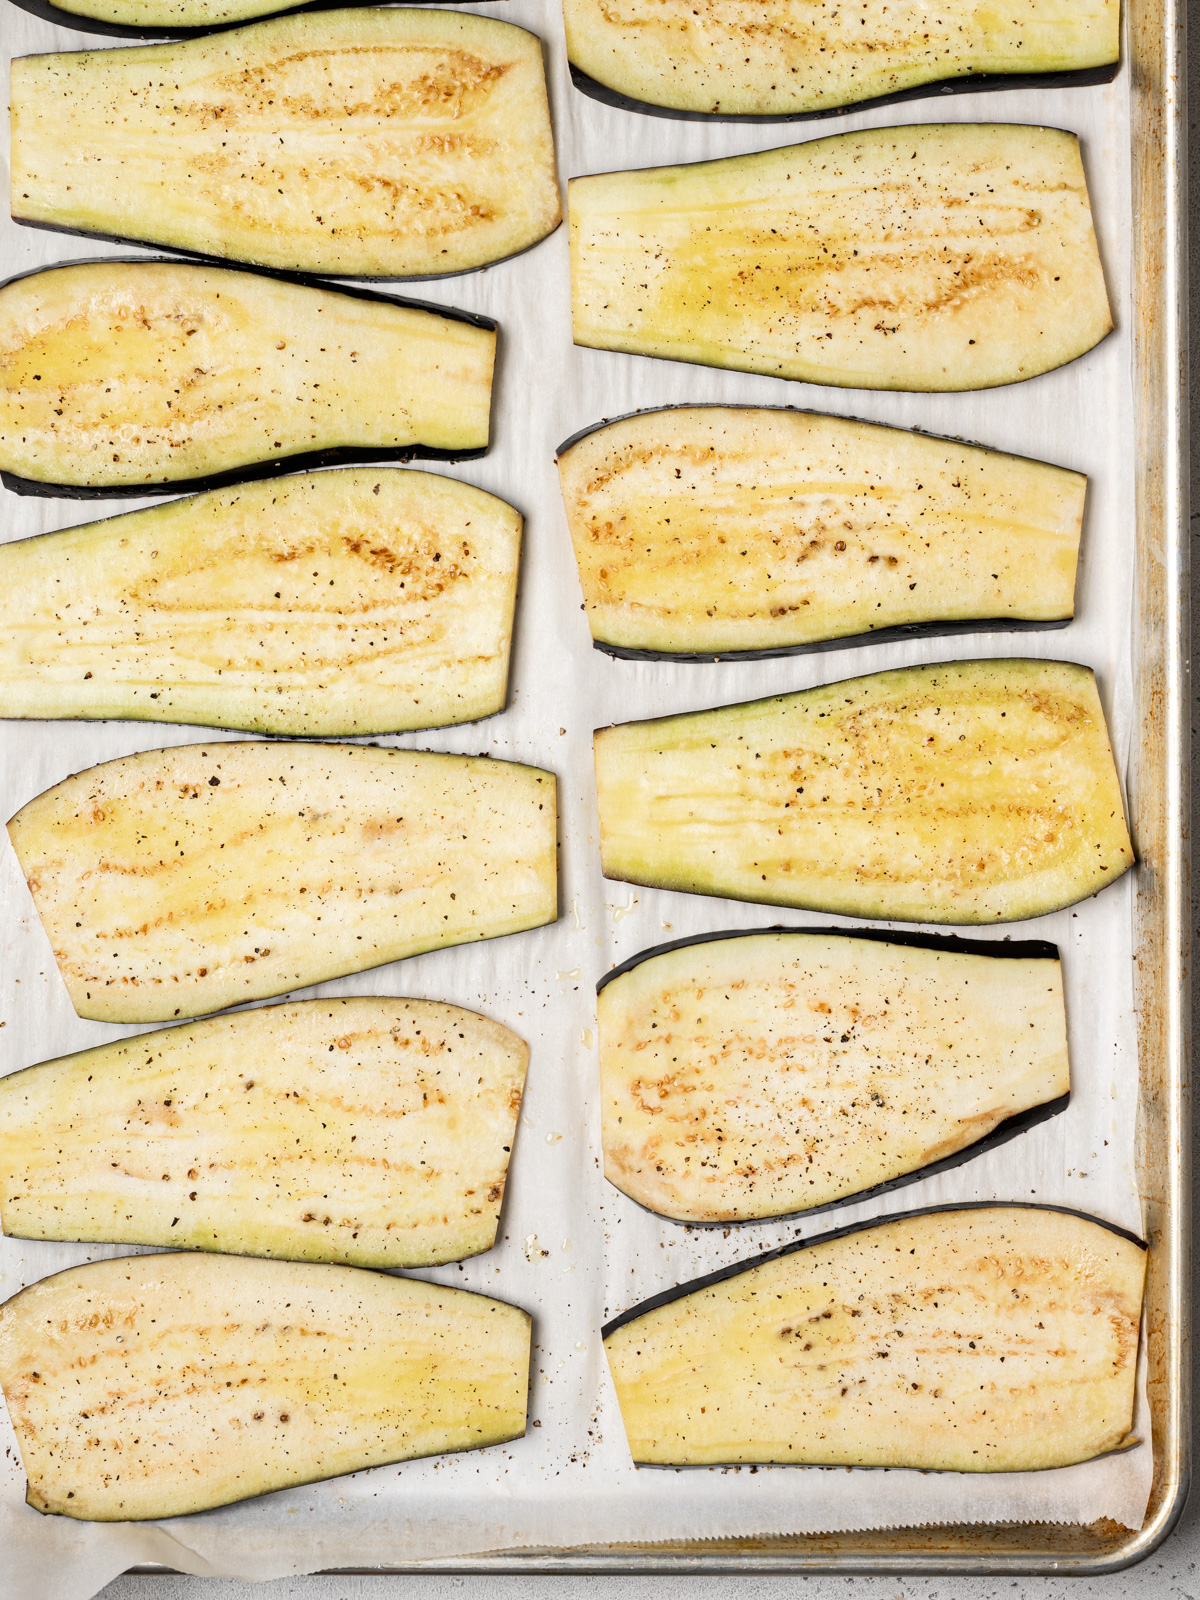 eggplant slices in a single layer on sheet pan ready to be baked